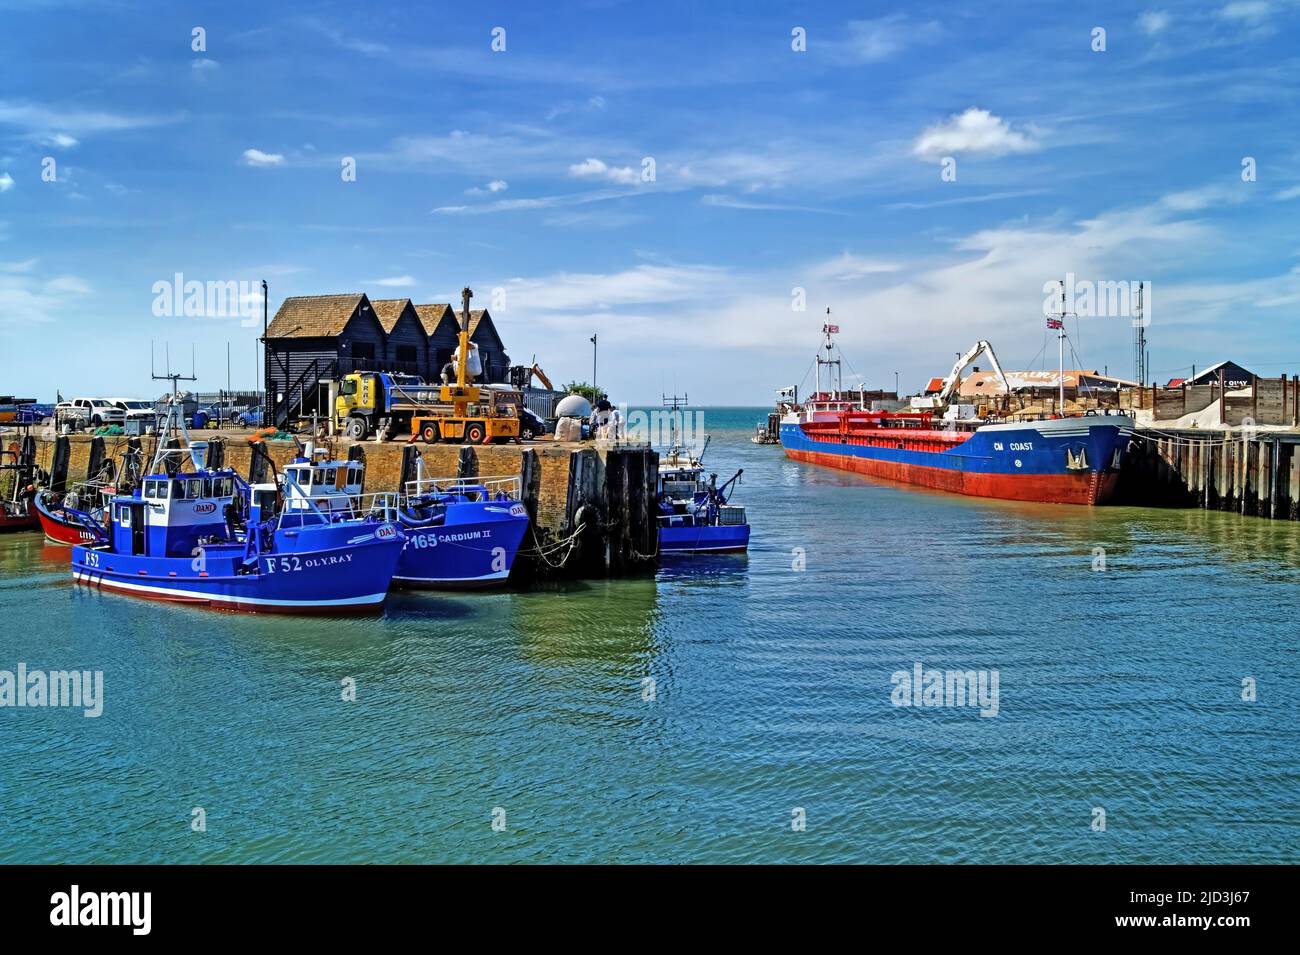 Regno Unito, Kent, ingresso a Whitstable Harbour, Boats e Fishermans Huts Foto Stock